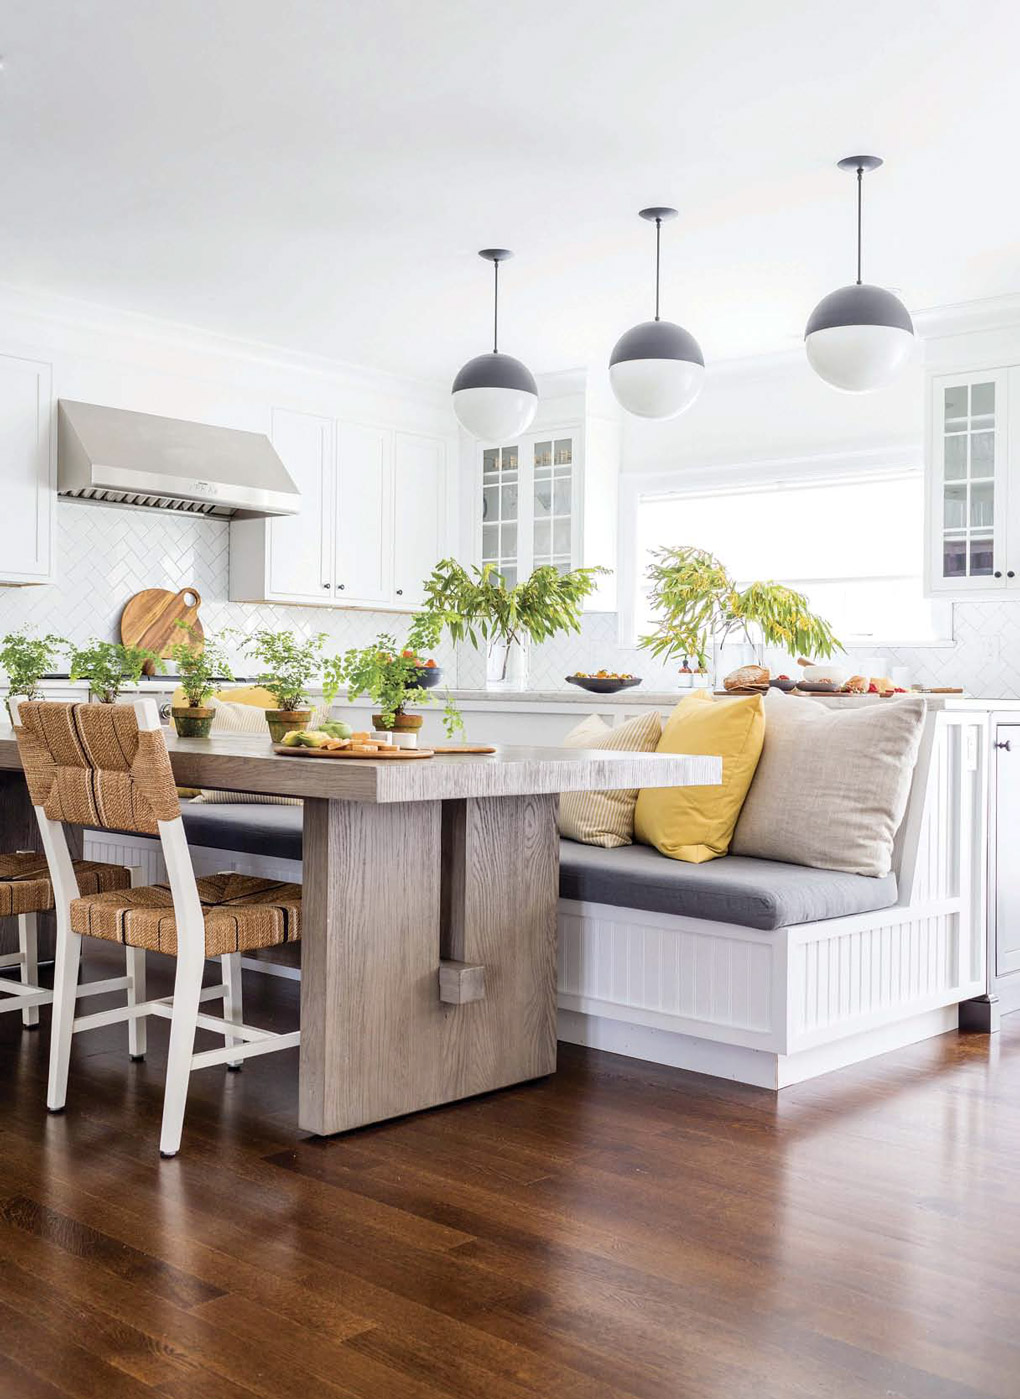 This kitchen feels approachable, easy, centered for the family to gather in, modern yet not stark, and lighthearted